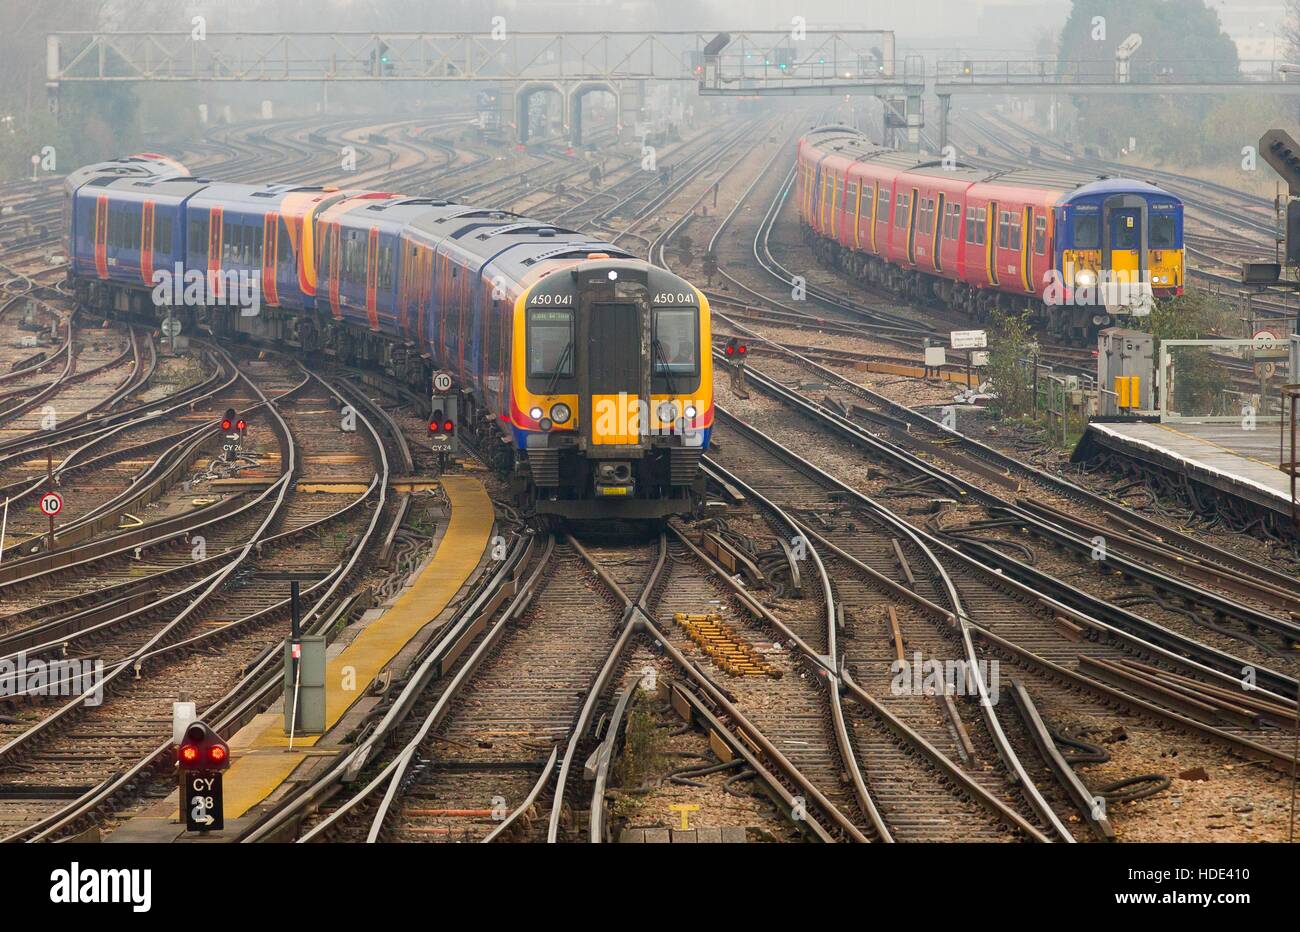 A South West Trains Class 450 train passes through Clapham Junction station in South West London. 450041 Stock Photo